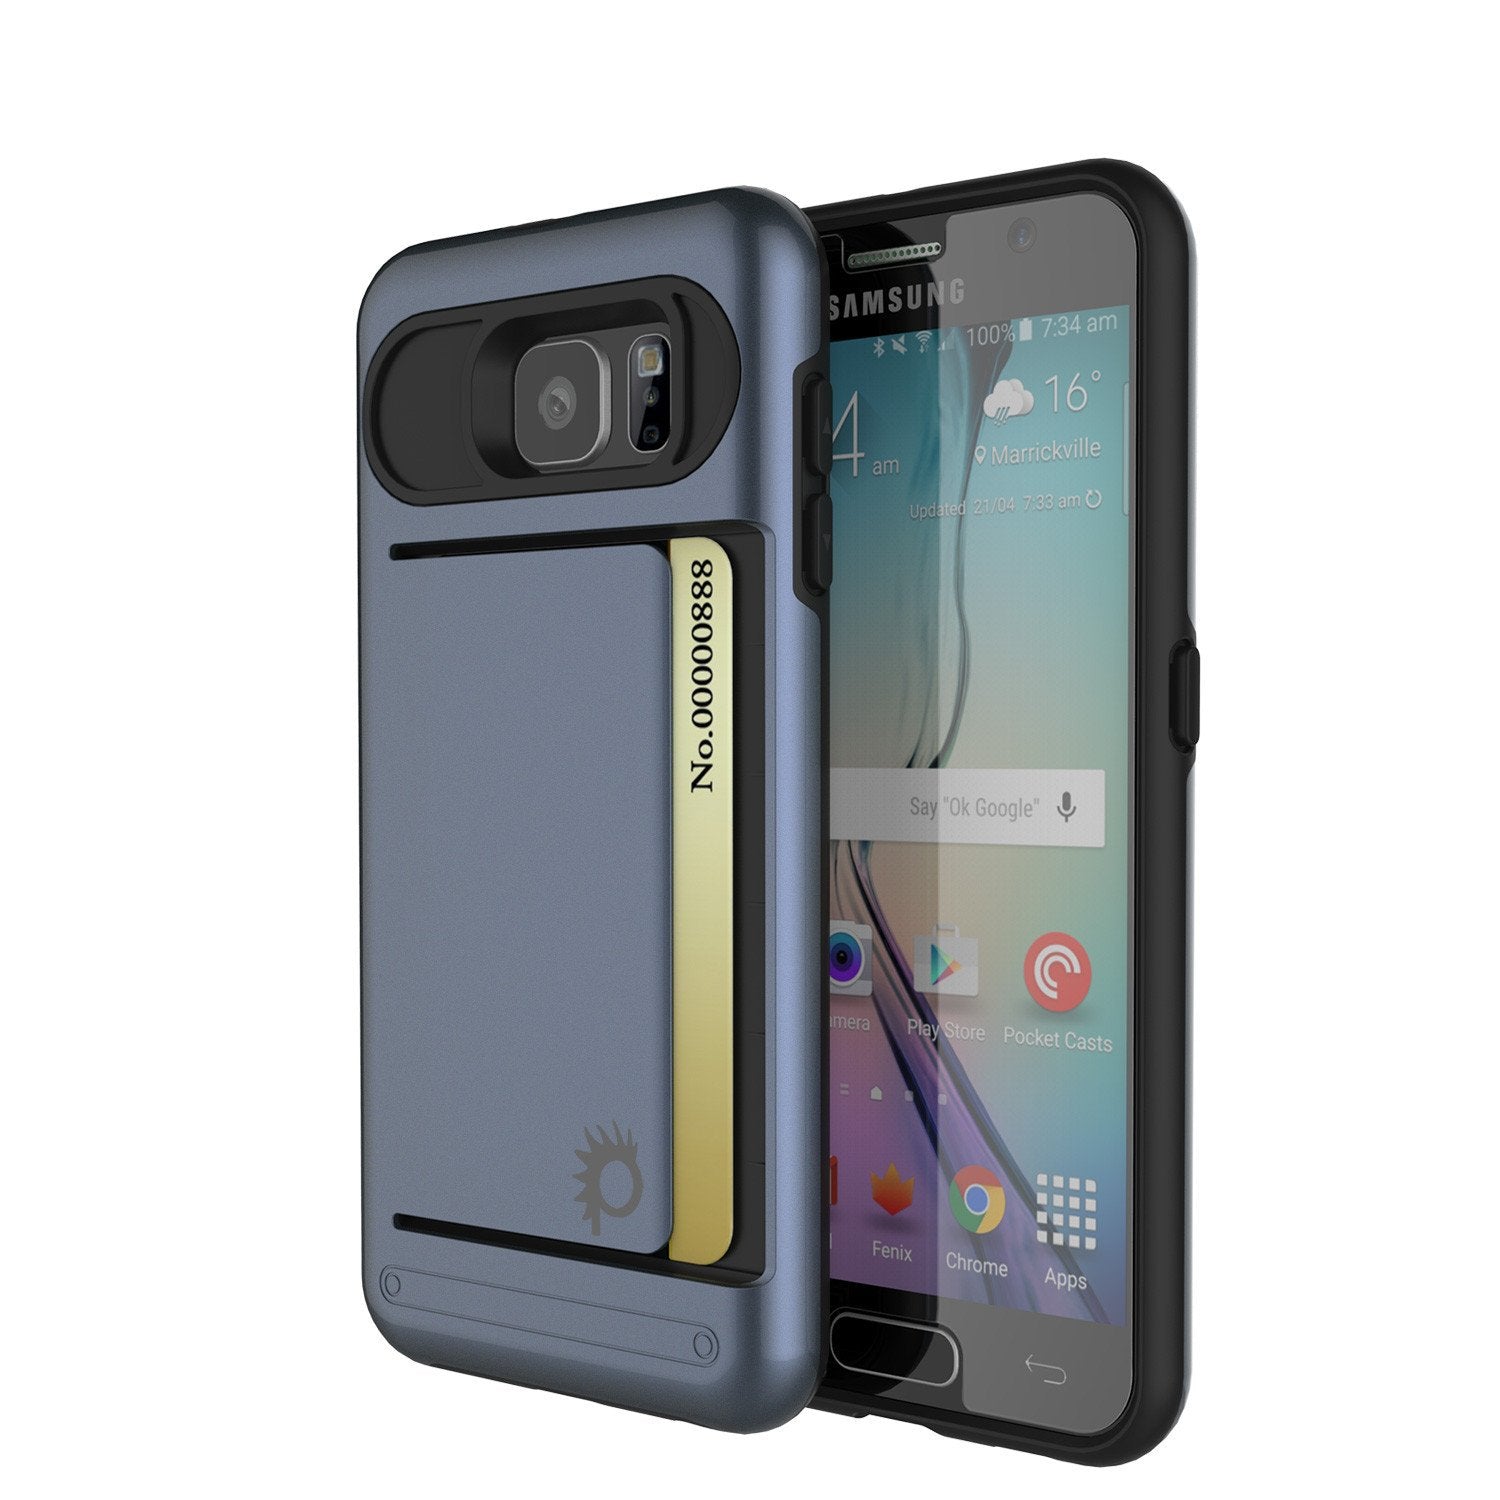 Galaxy S6 EDGE Case PunkCase CLUTCH Navy Series Slim Armor Soft Cover Case w/ Screen Protector